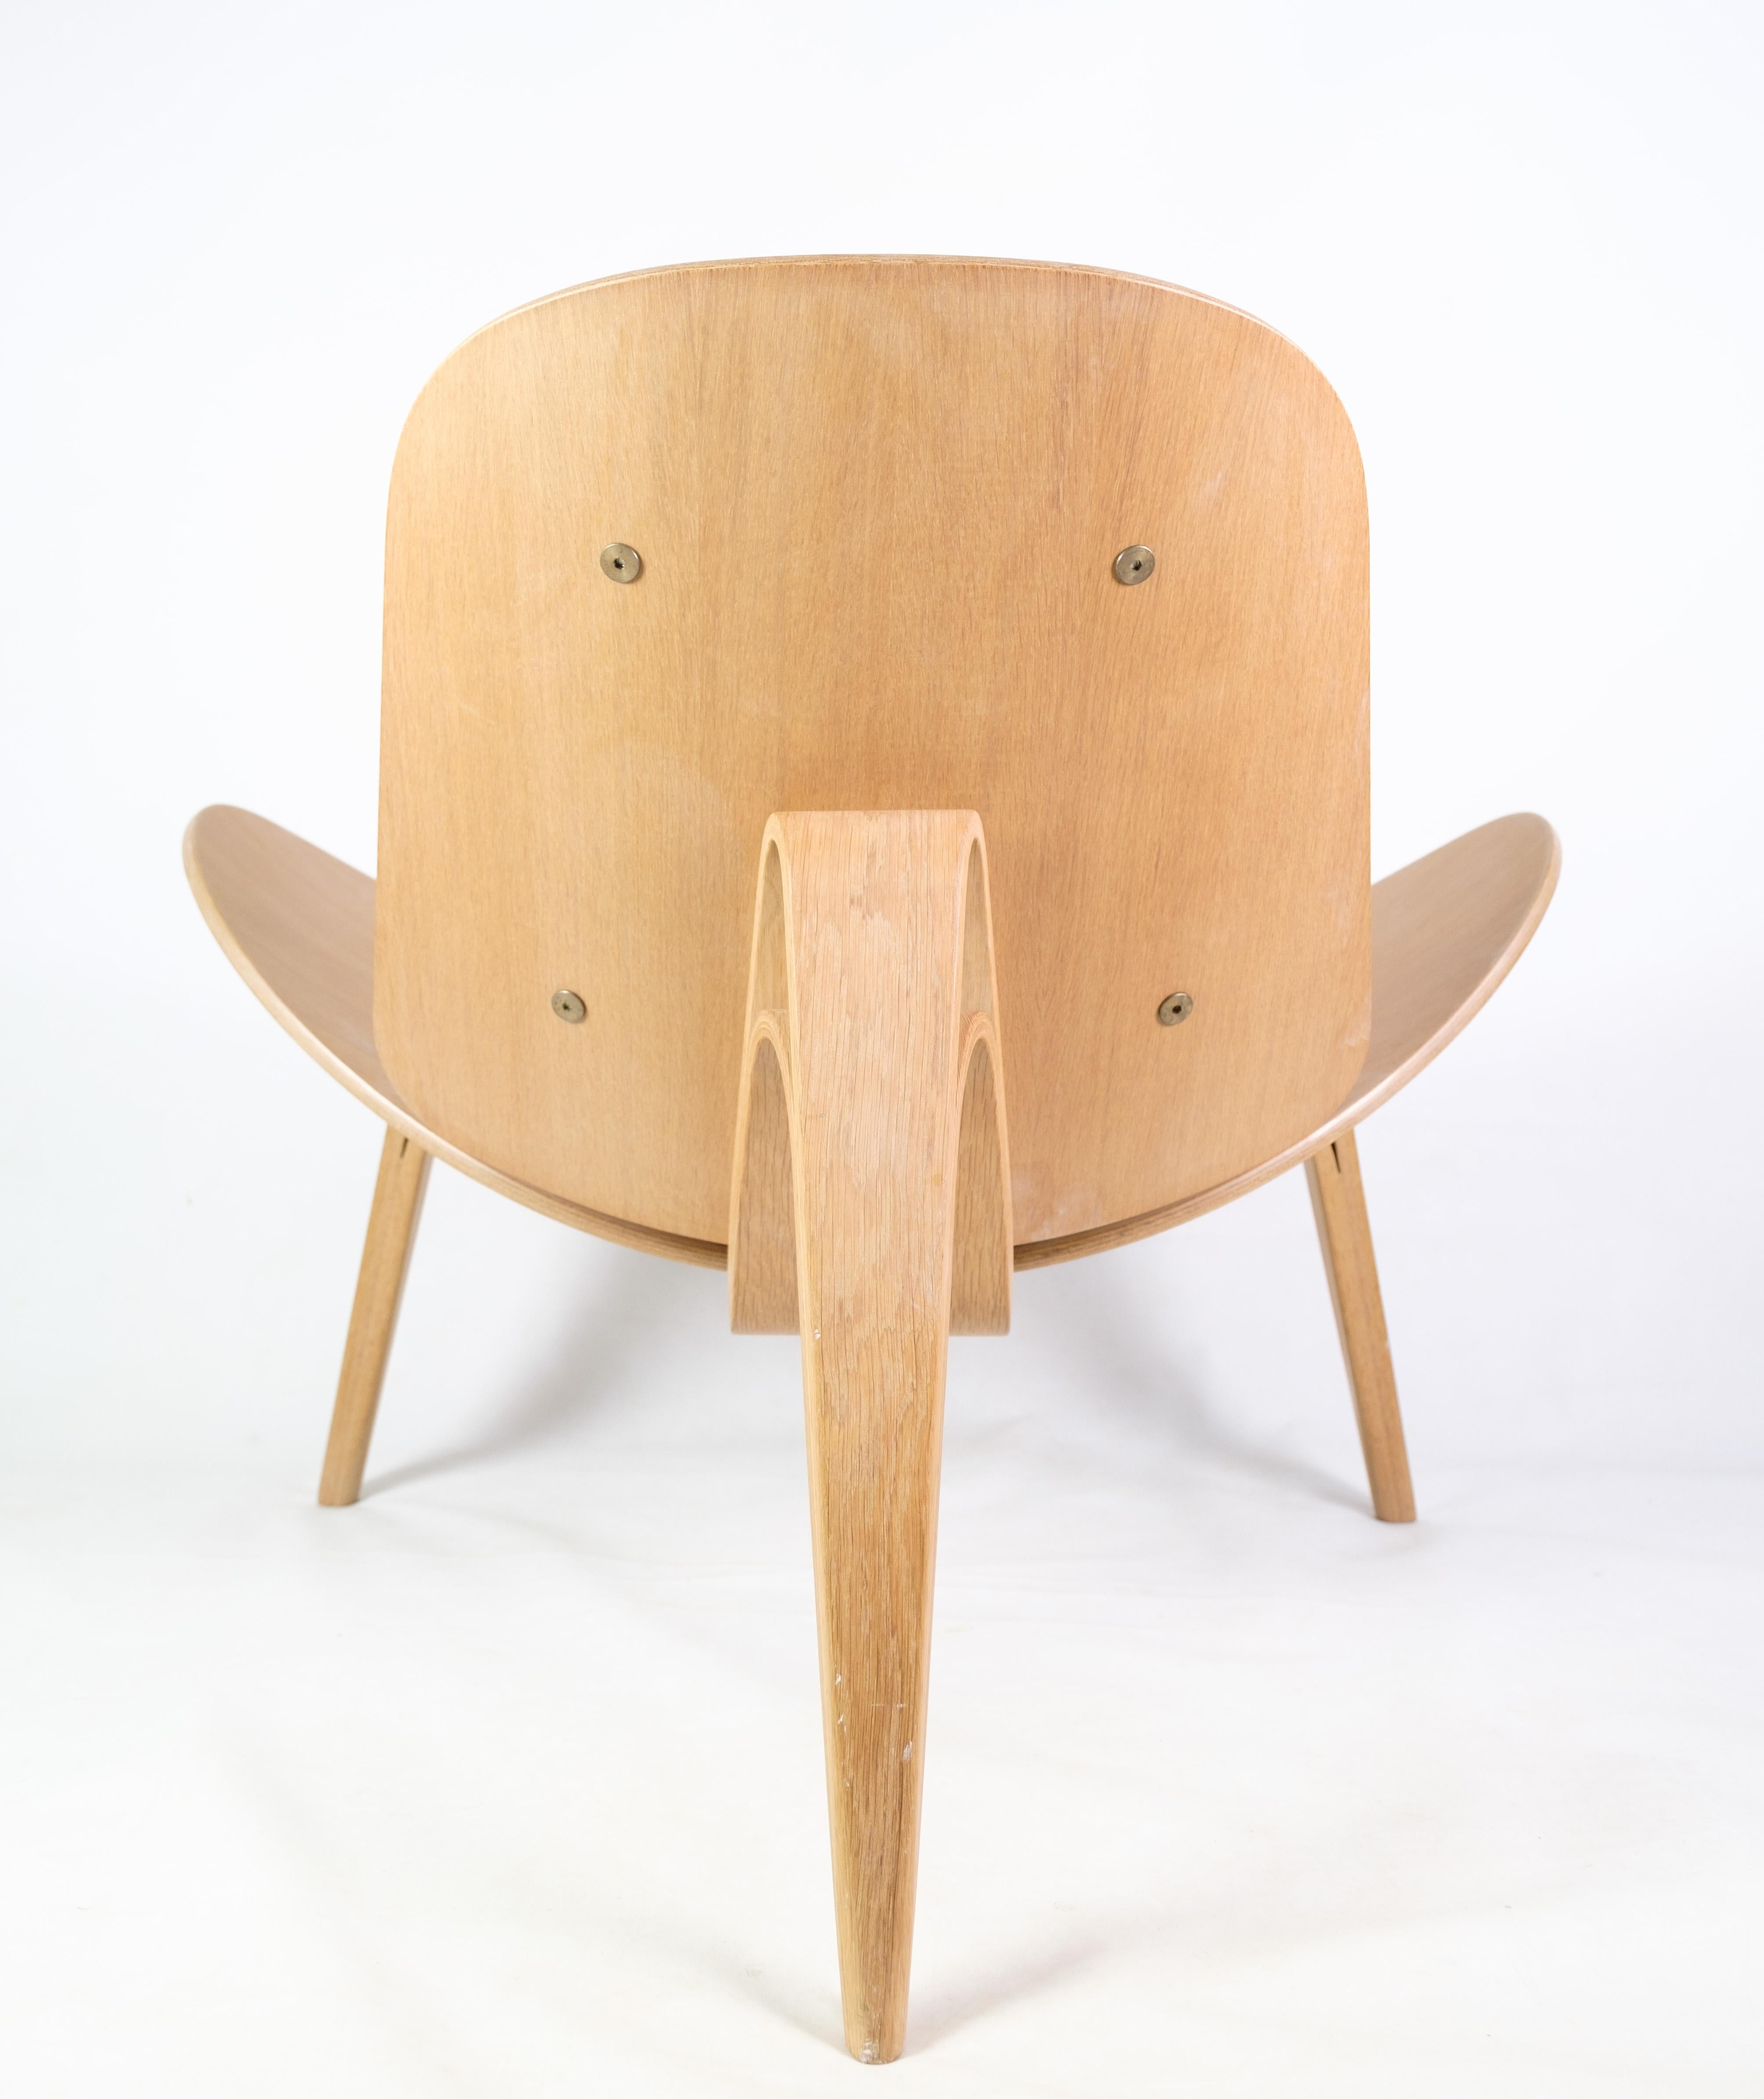 Leather he shell chair model CH07, designed by Hans J. Wegner, made of oak from 2007